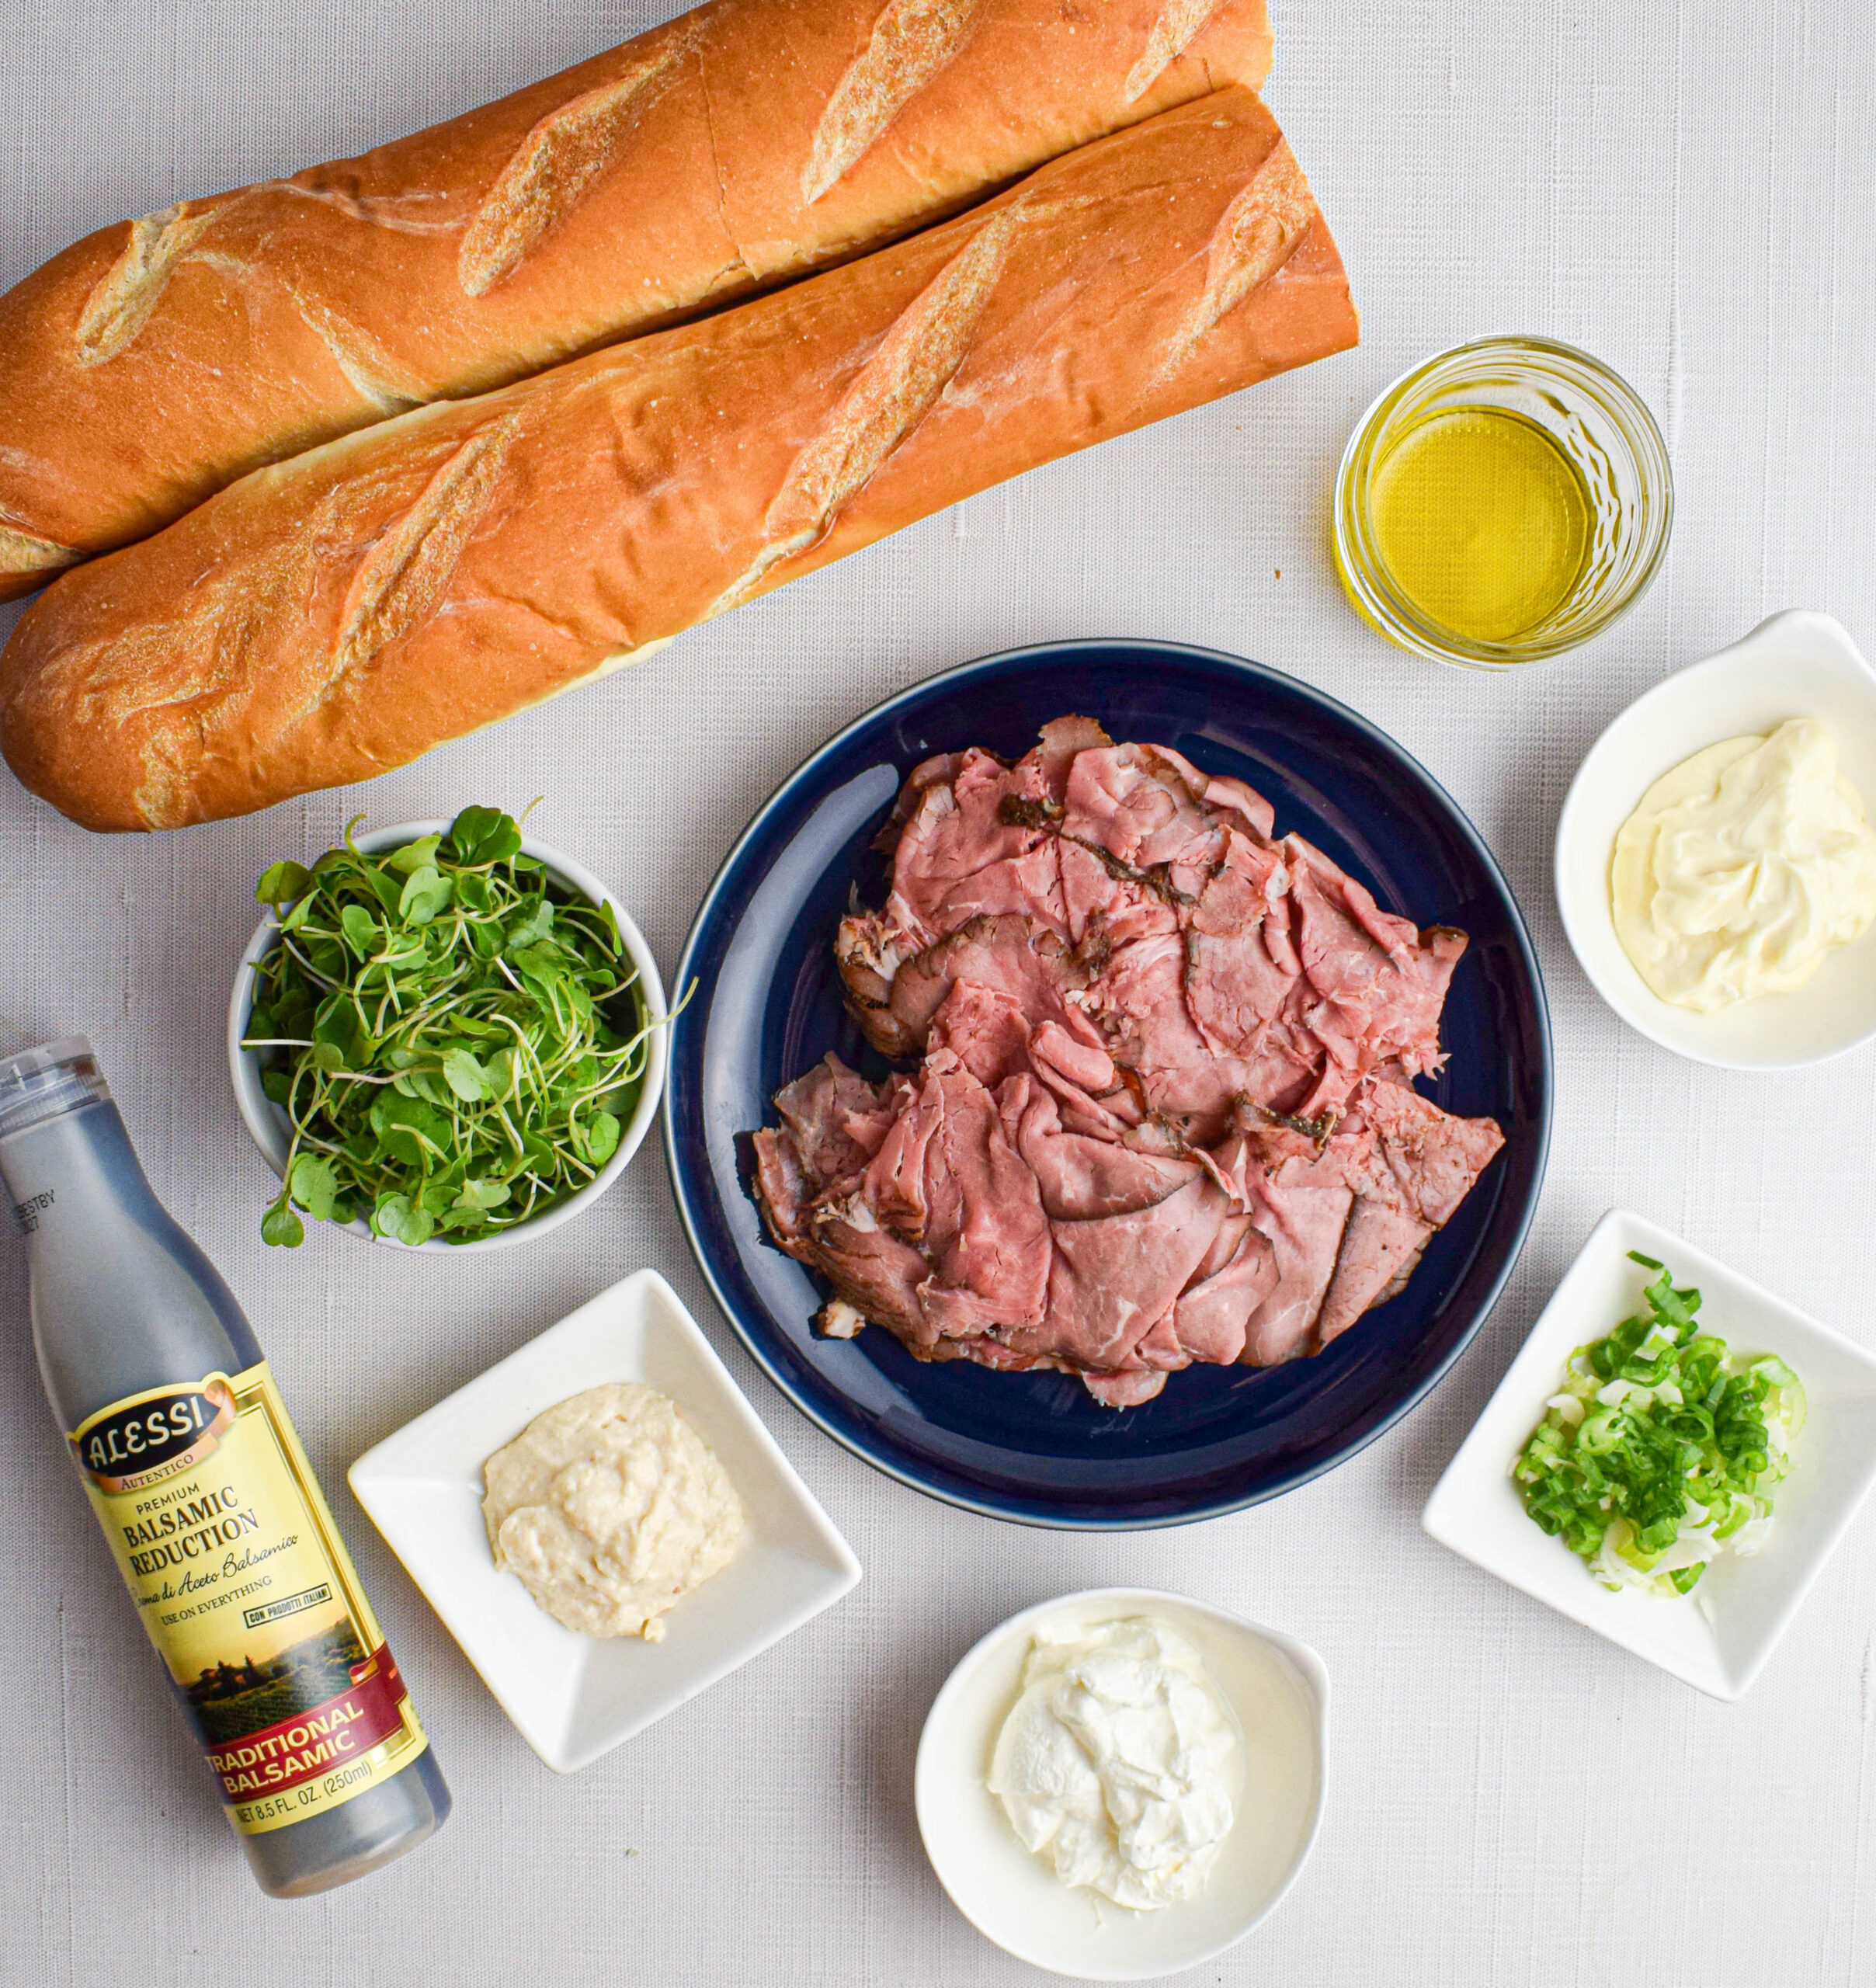 ingredients laid out for roast beef crostini on plates and in bowls: shaved roast beef, micro arugula, horseradish, sour cream, mayonnaise, sliced green onions, balsamic reduction, olive oil, baguette